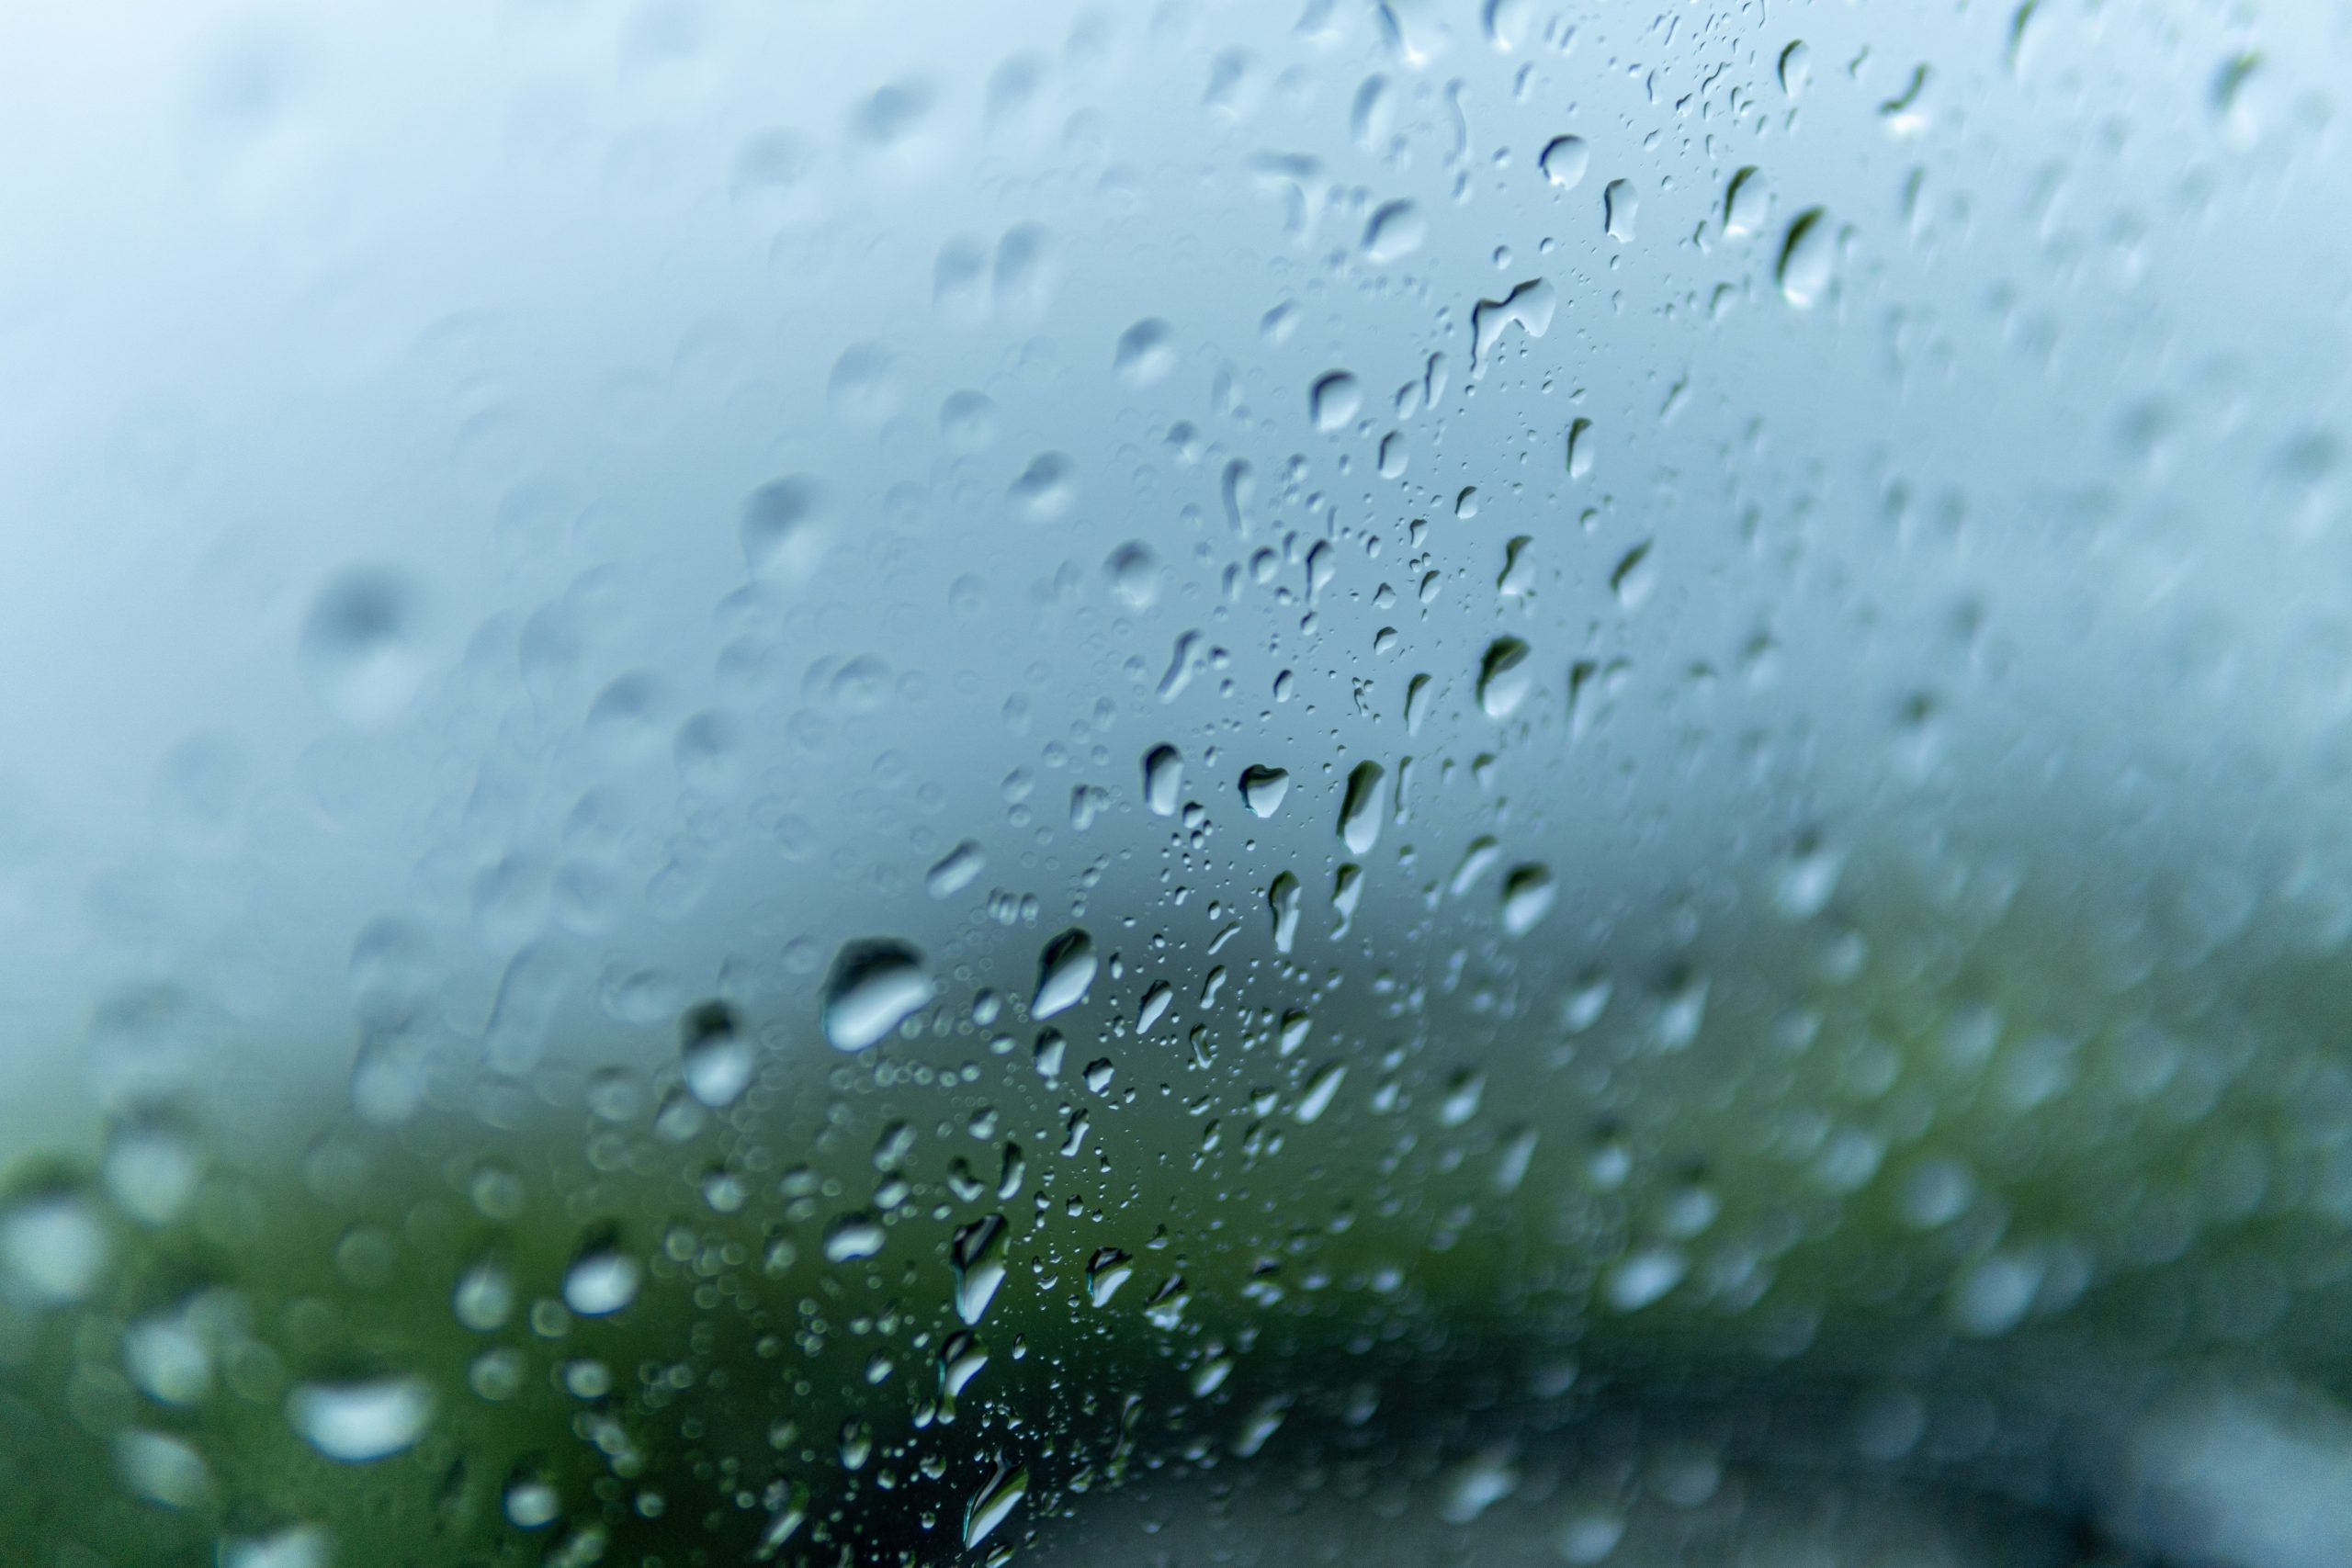 Closeup shot of the glass of a window covered by rain droplets - for backgrounds and textures